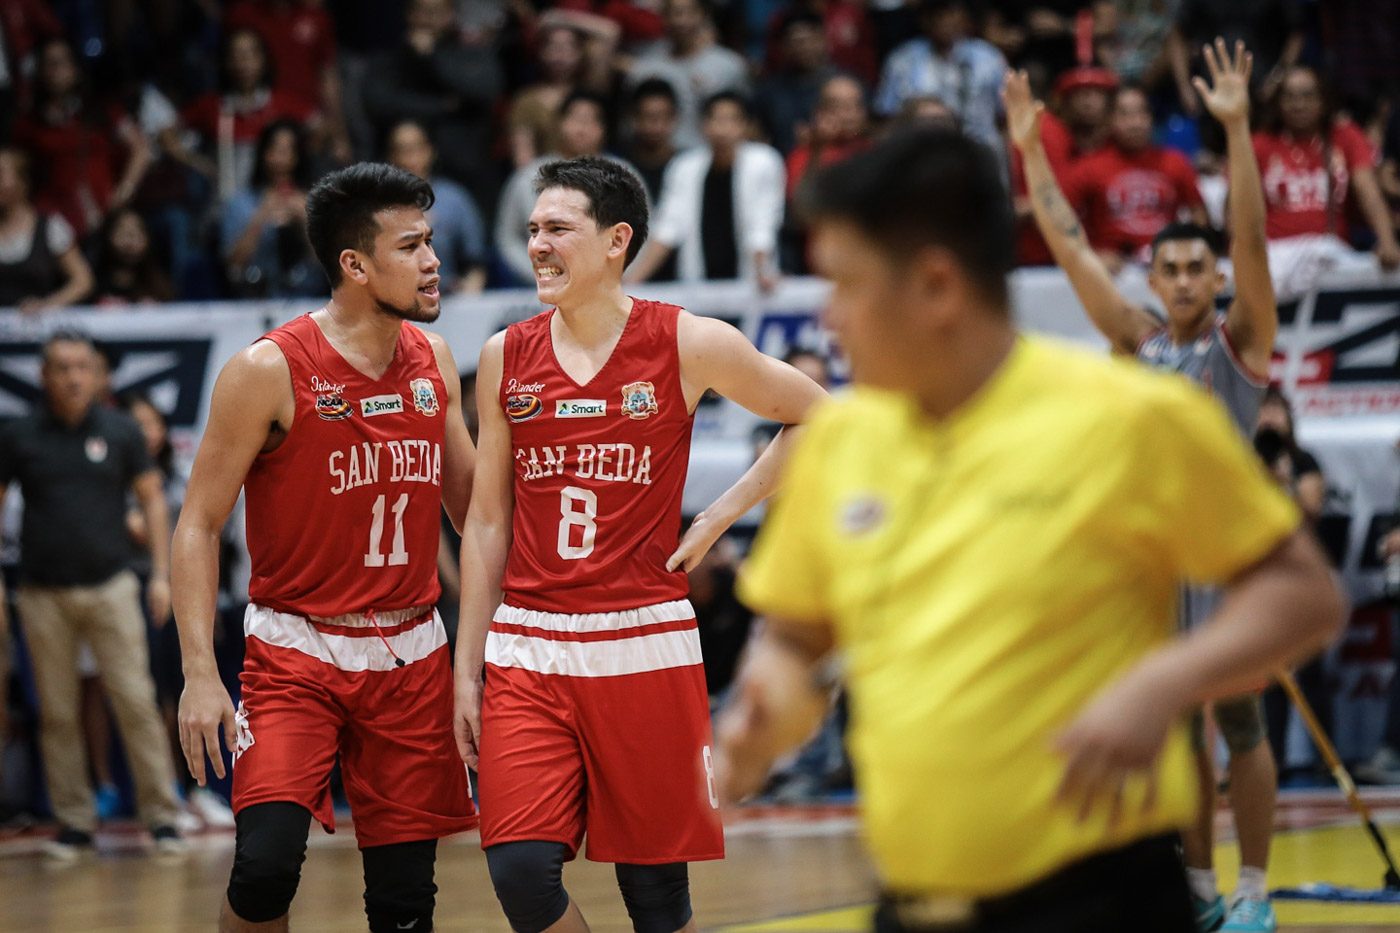 San Beda draws first blood in NCAA finals, gives Lyceum first loss